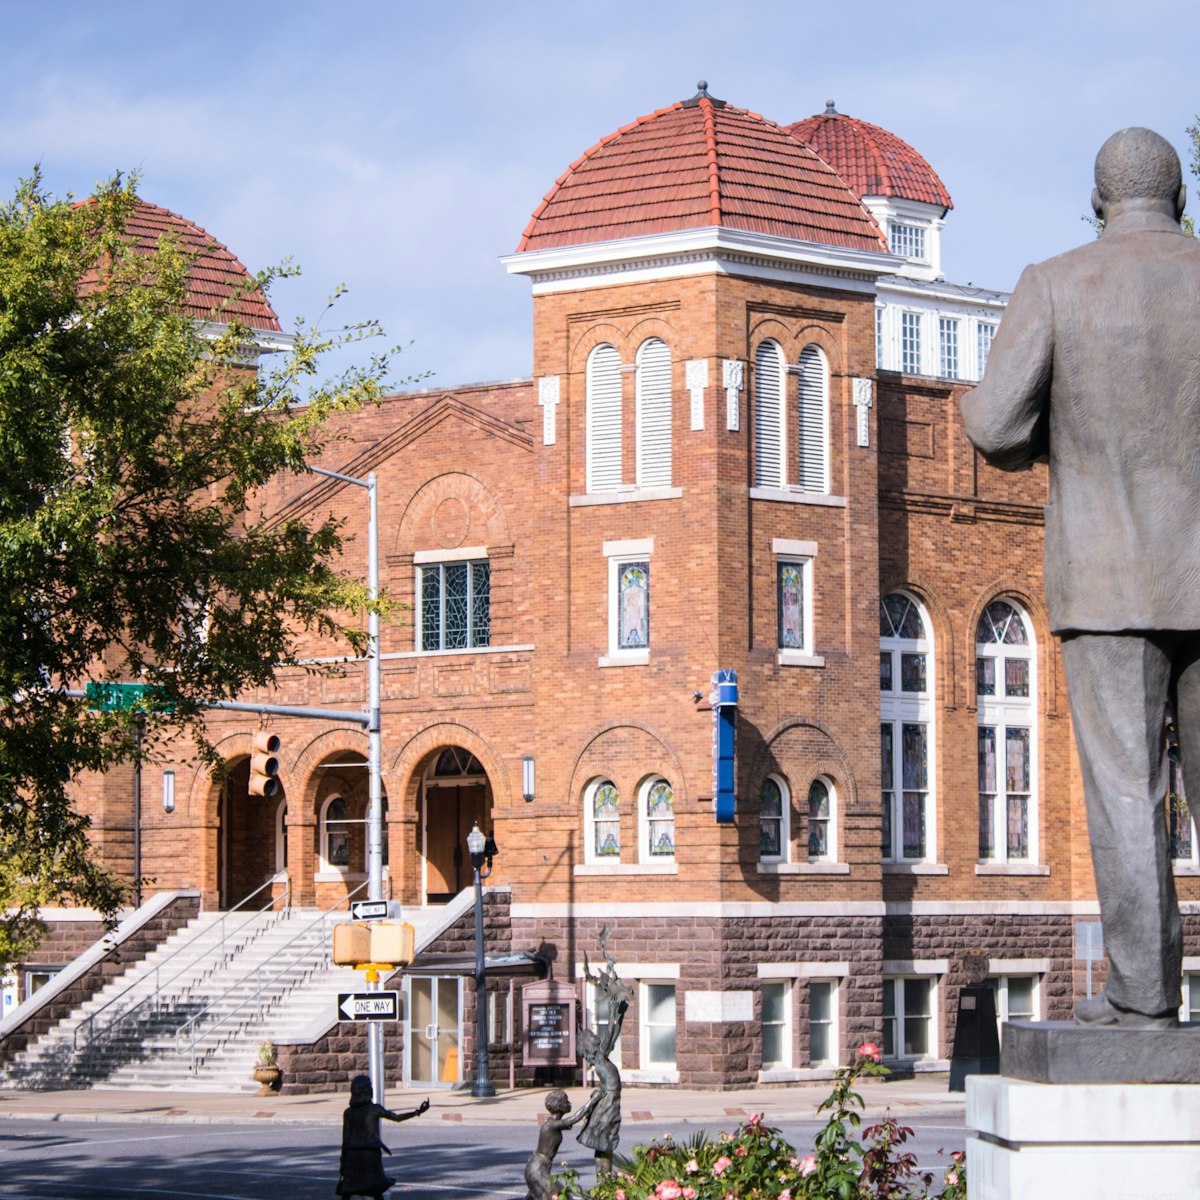 Statue of Dr. Martin Luther King, Jr. Statue in Kelly Ingram Park, Birmingham, Alabama, USA, North America across from the 16th Street Baptist Church in Birmingham. October 13, 2017.; Shutterstock ID 773710357